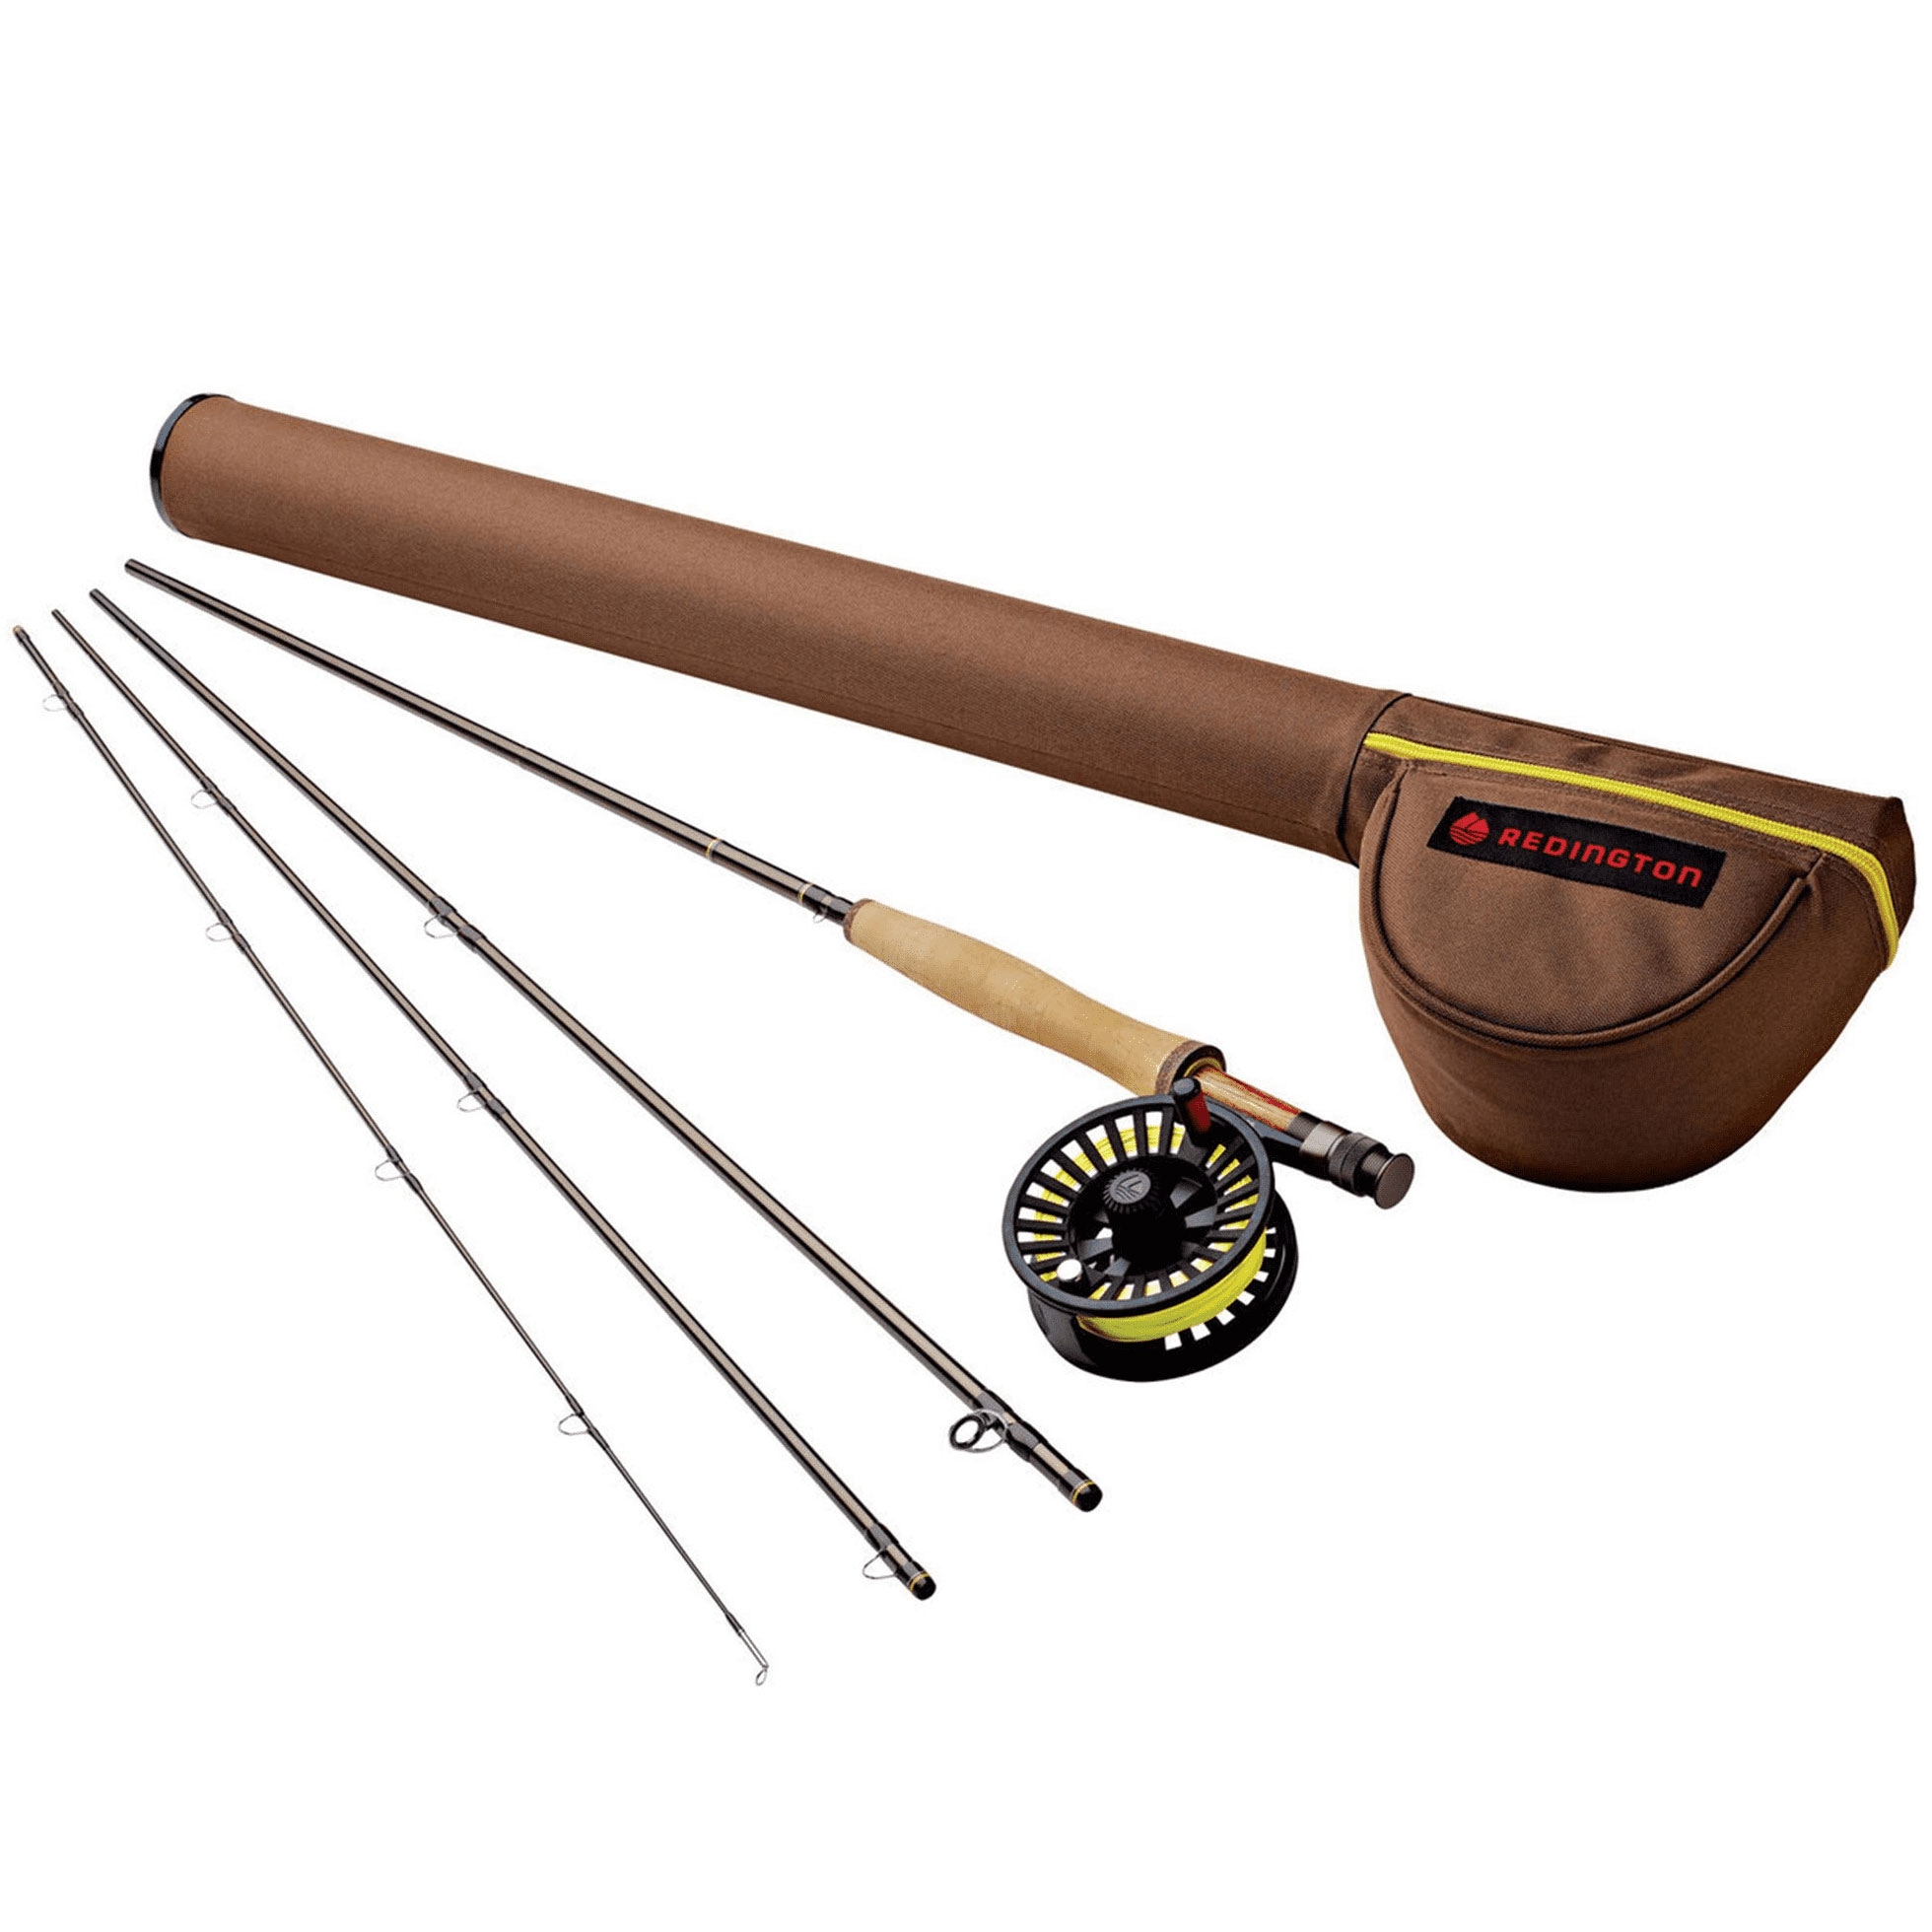 Redington Black Graphite Fly Fishing Rod - Lightweight and Portable for  Outdoor Fishing in the Fishing Equipment department at